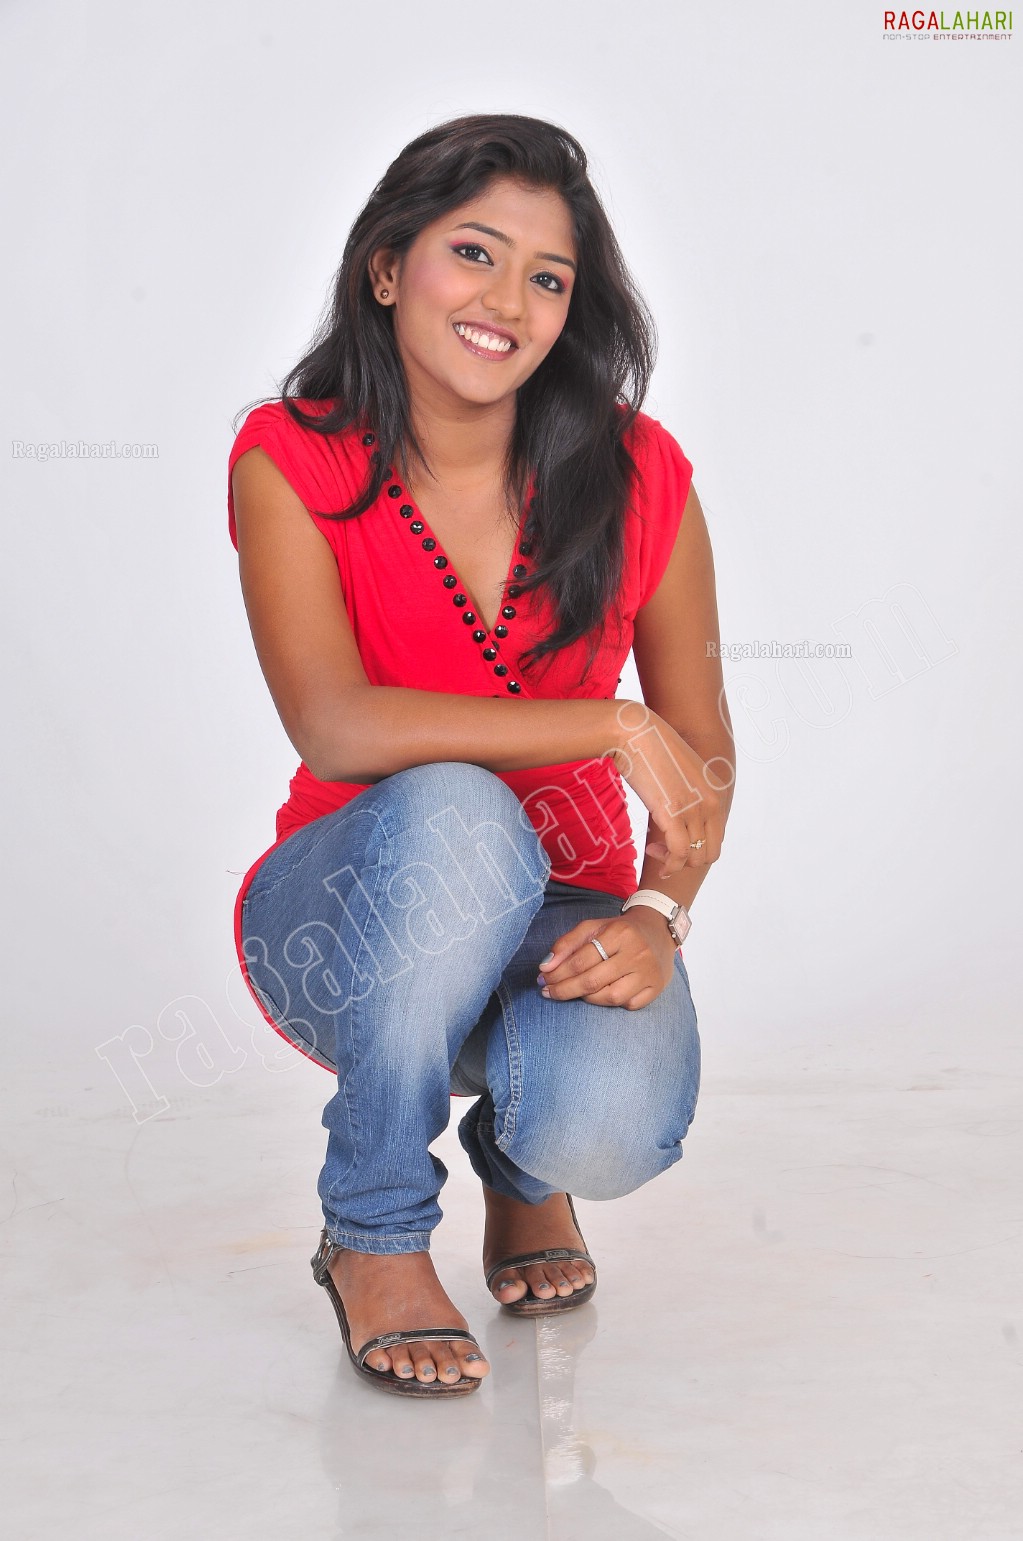 Eesha Rebba in Tomato Red Top and Jeans Exclusive Photo Shoot